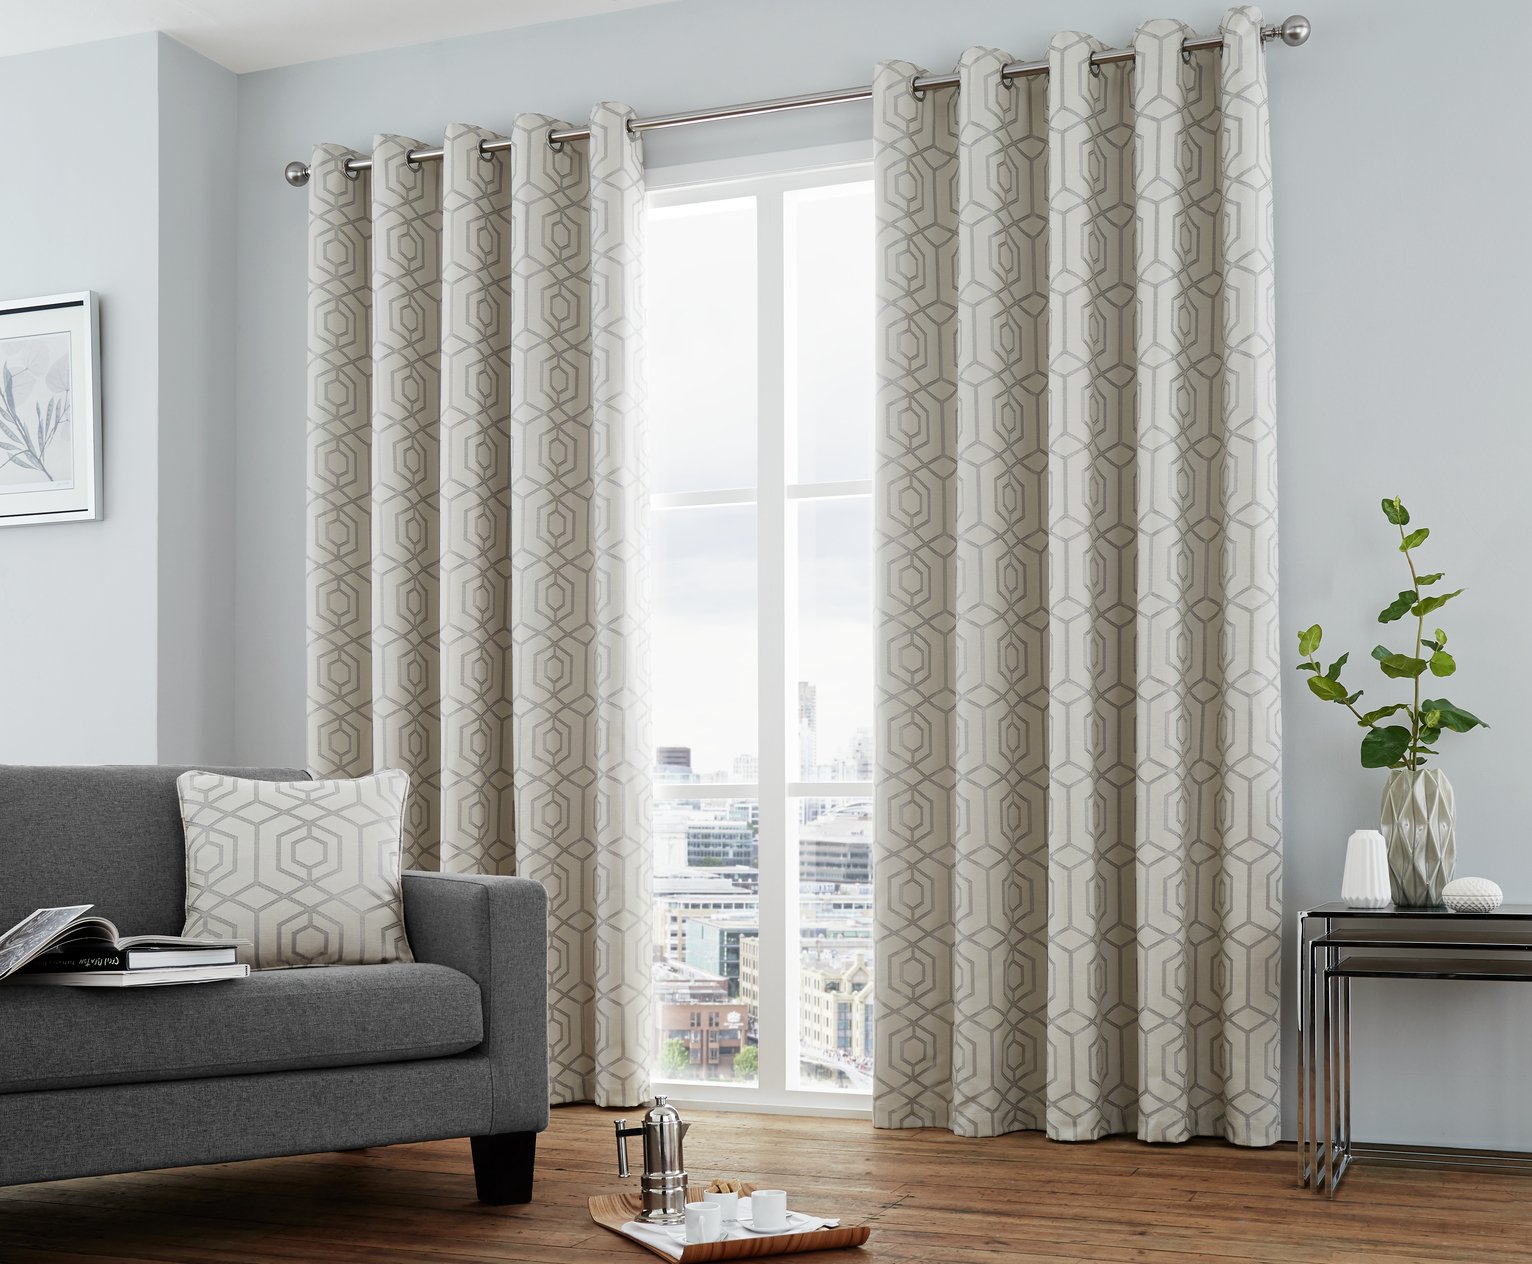 Curtina Camberwell Eyelet Curtains - 168x137cm - Silver